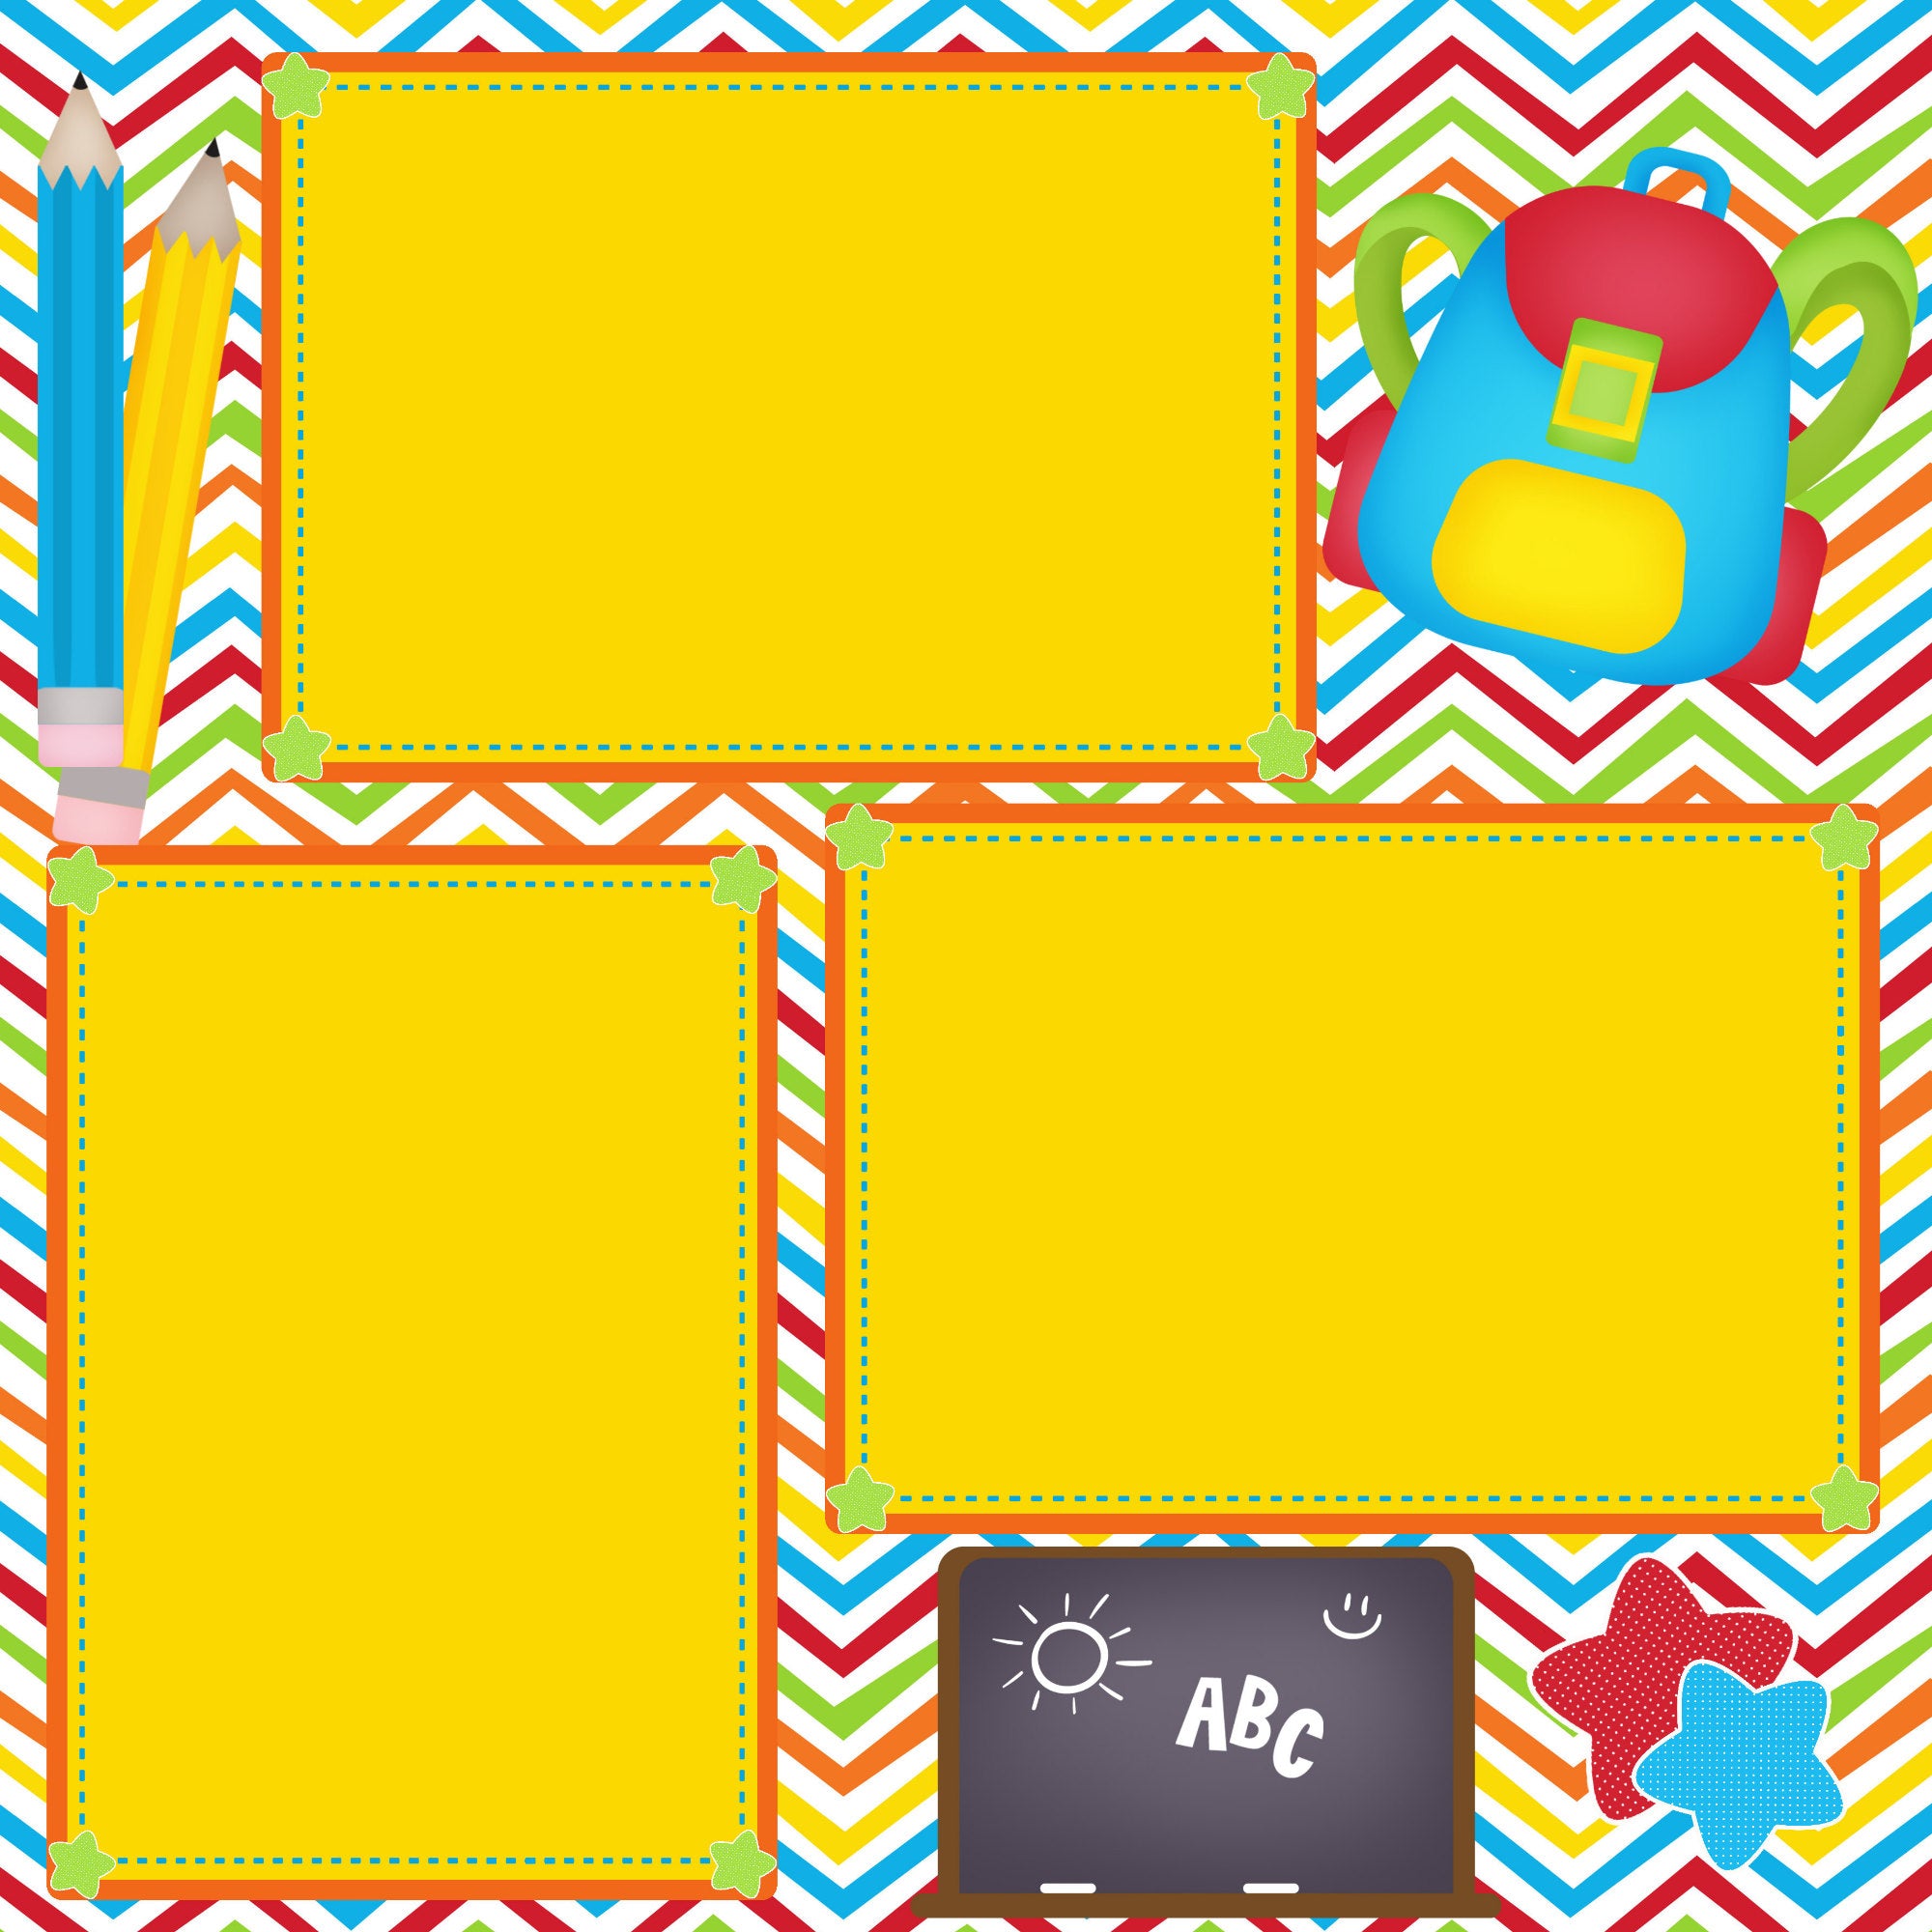 Back To School (2) - 12 x 12 Premade, Printed Scrapbook Pages by SSC Designs